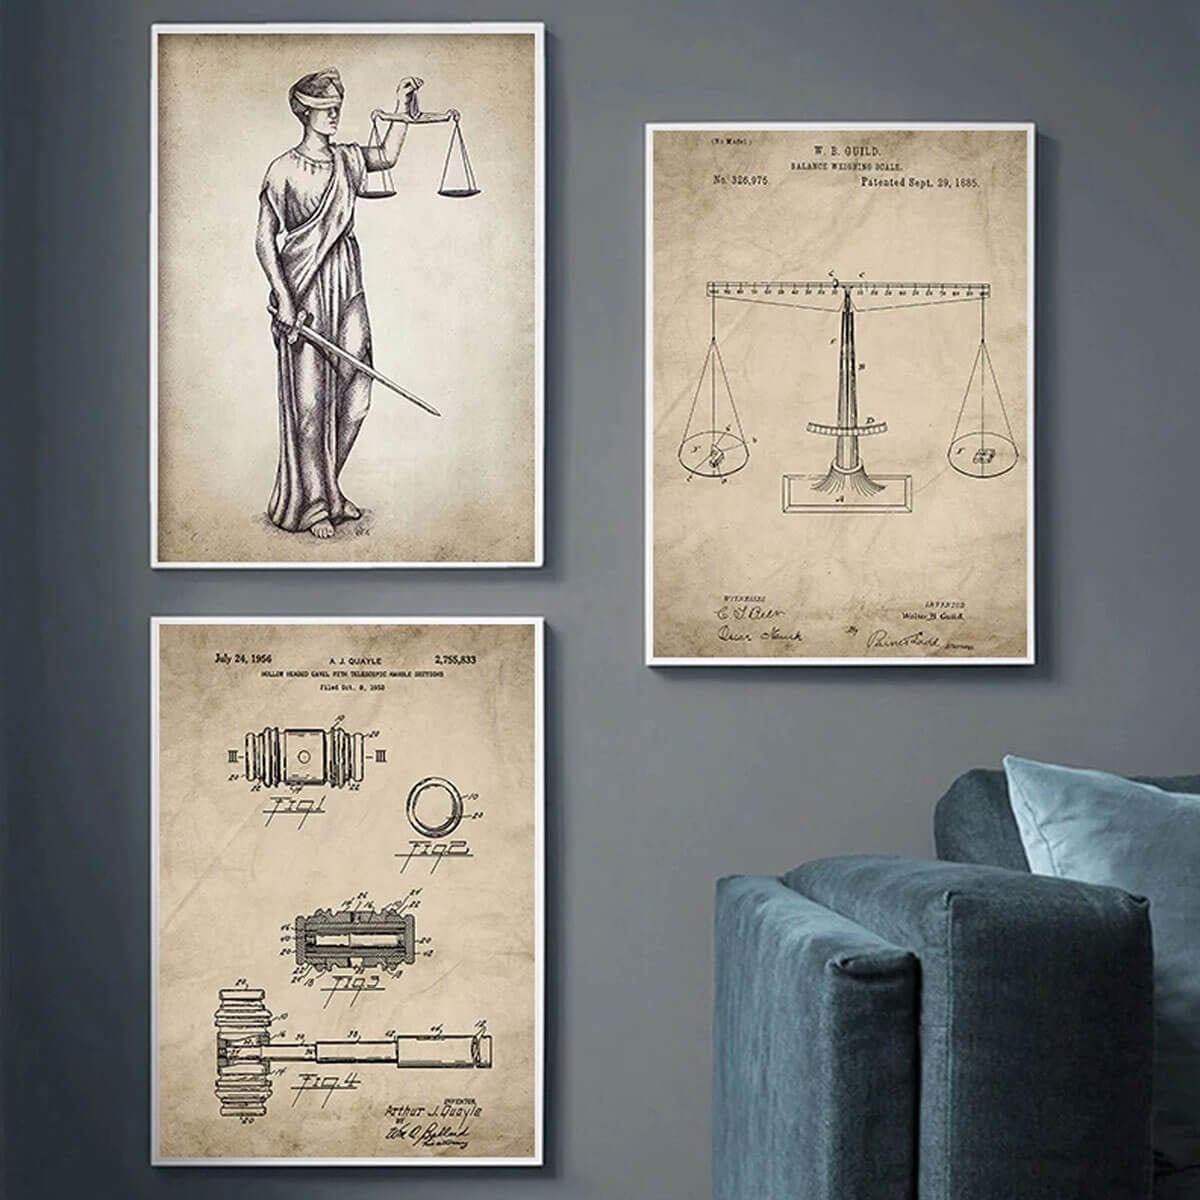 Attorney Lady Justice Law Canvas Painting Of Justice Lawyer Print Wall Art